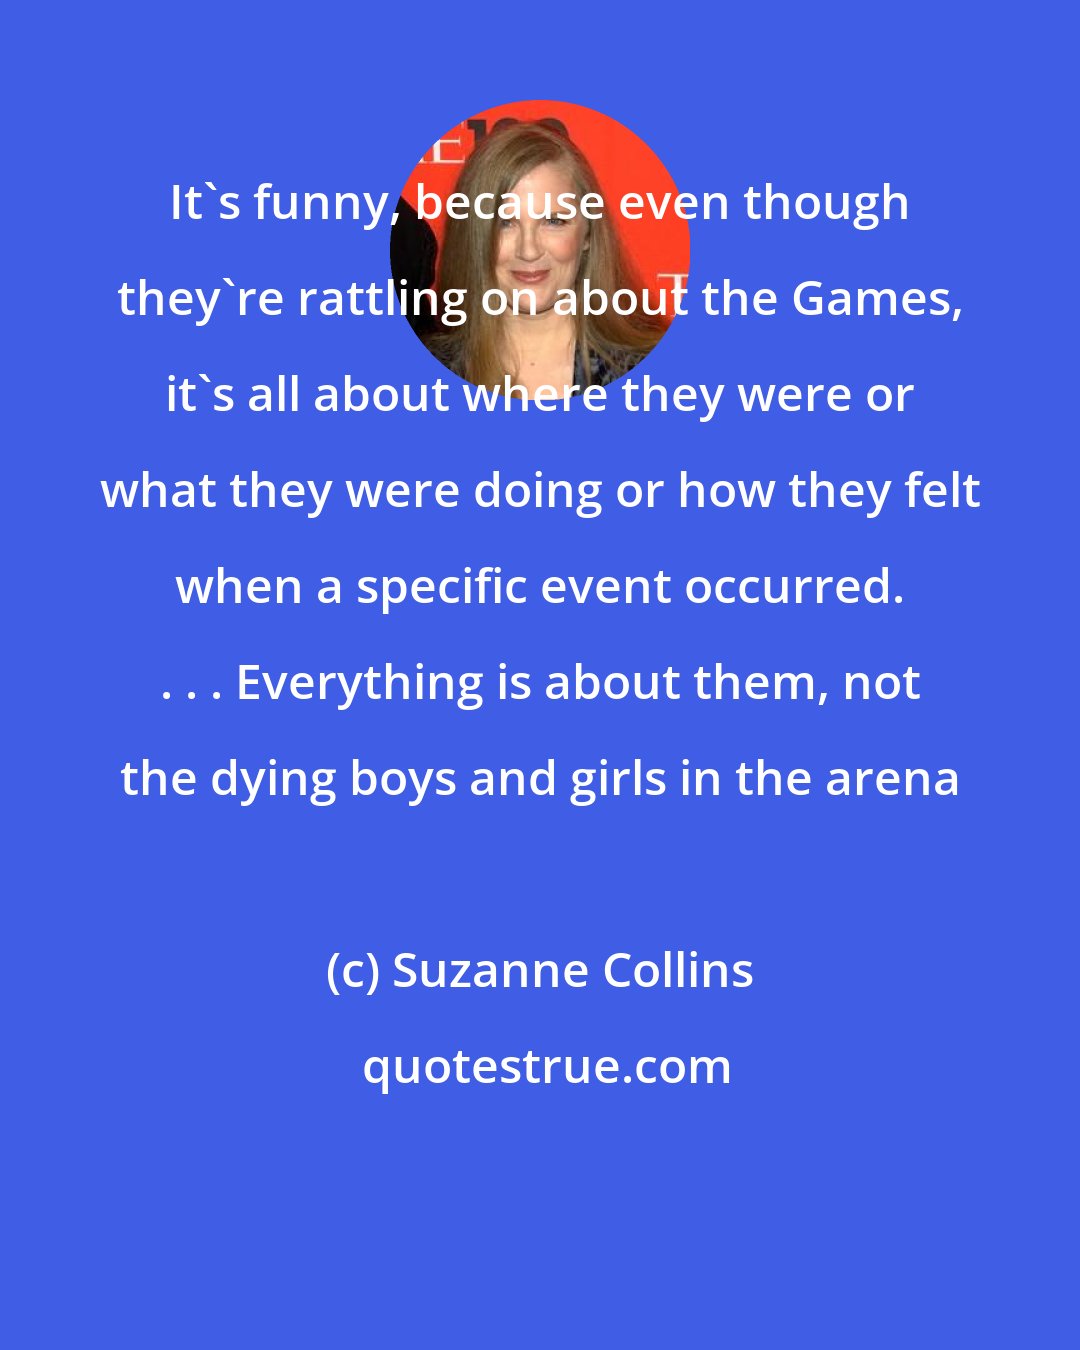 Suzanne Collins: It's funny, because even though they're rattling on about the Games, it's all about where they were or what they were doing or how they felt when a specific event occurred. . . . Everything is about them, not the dying boys and girls in the arena